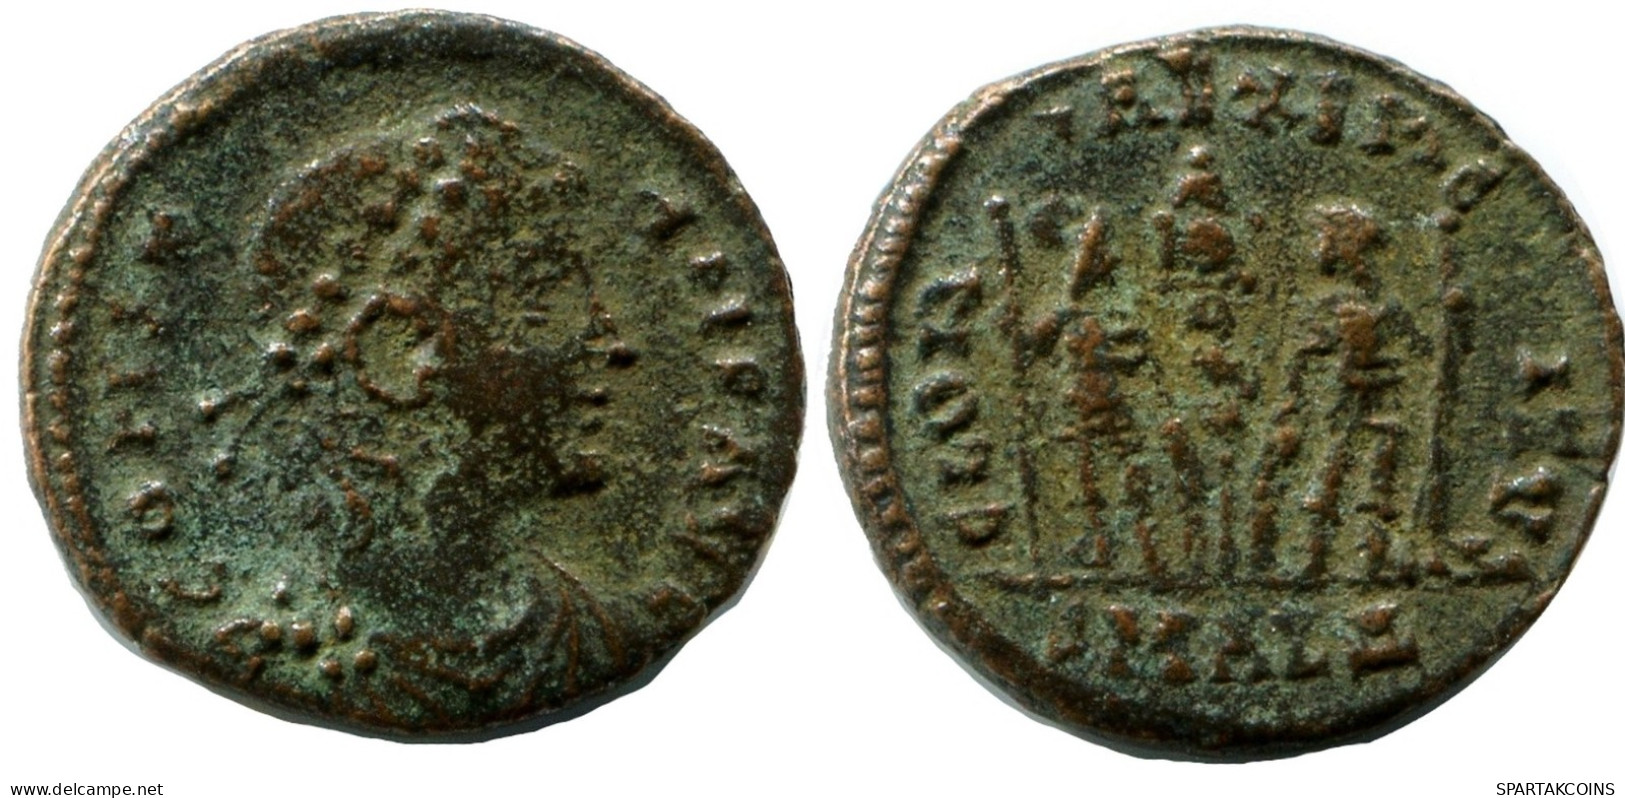 CONSTANS MINTED IN ALEKSANDRIA FROM THE ROYAL ONTARIO MUSEUM #ANC11448.14.E.A - L'Empire Chrétien (307 à 363)